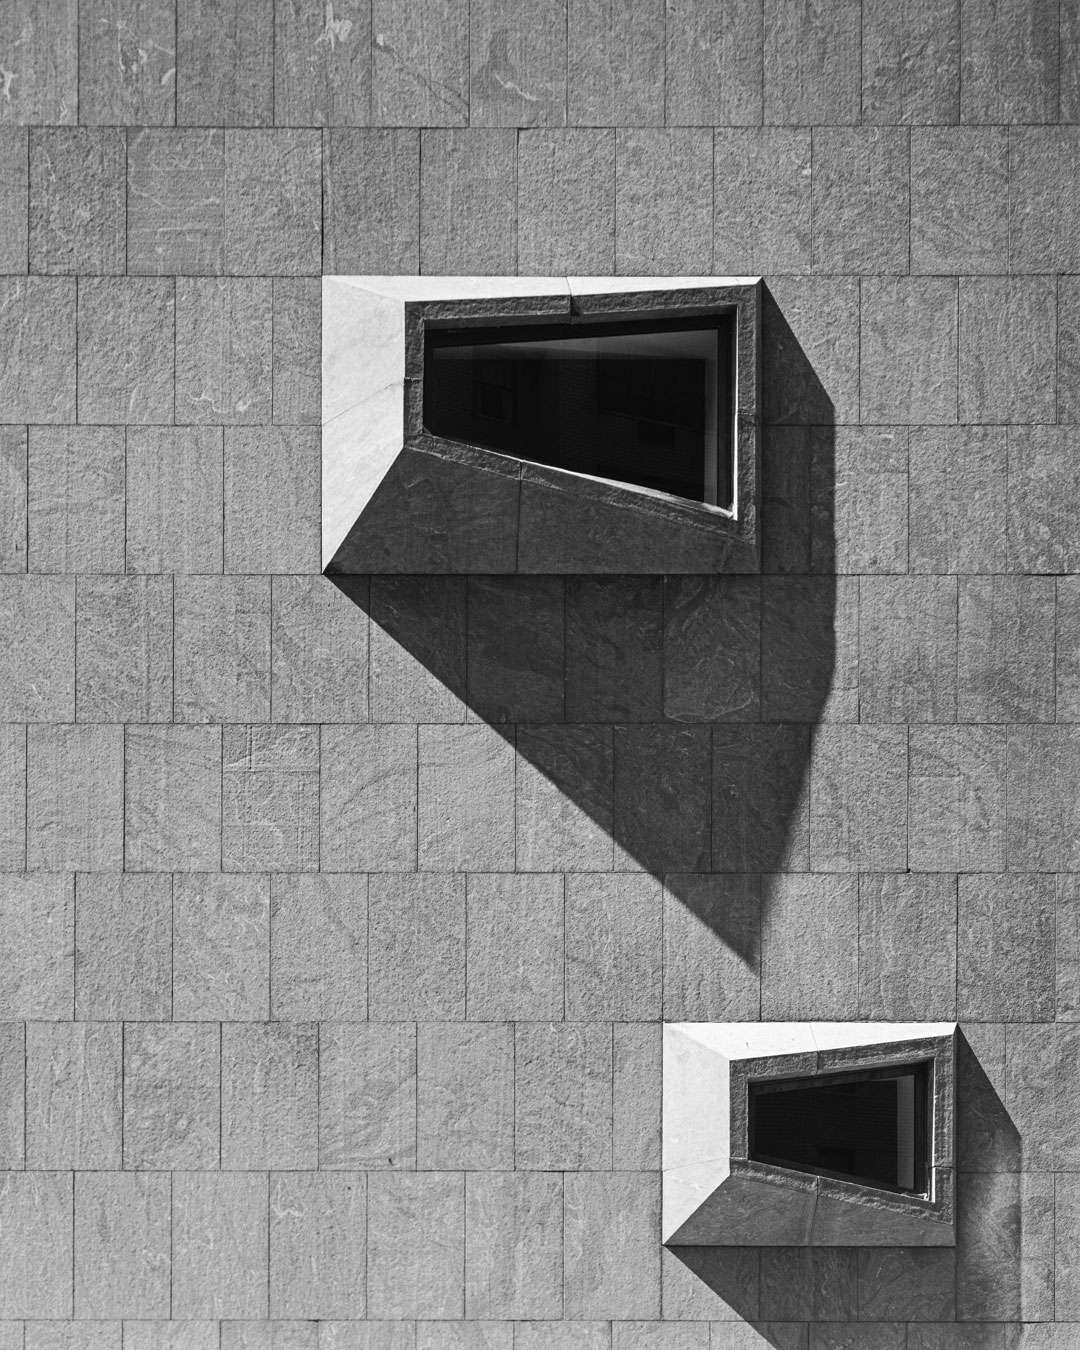 Eszra Stoller Whitney Museum of American Art by Marcel Breuer, New York, NY, 1966